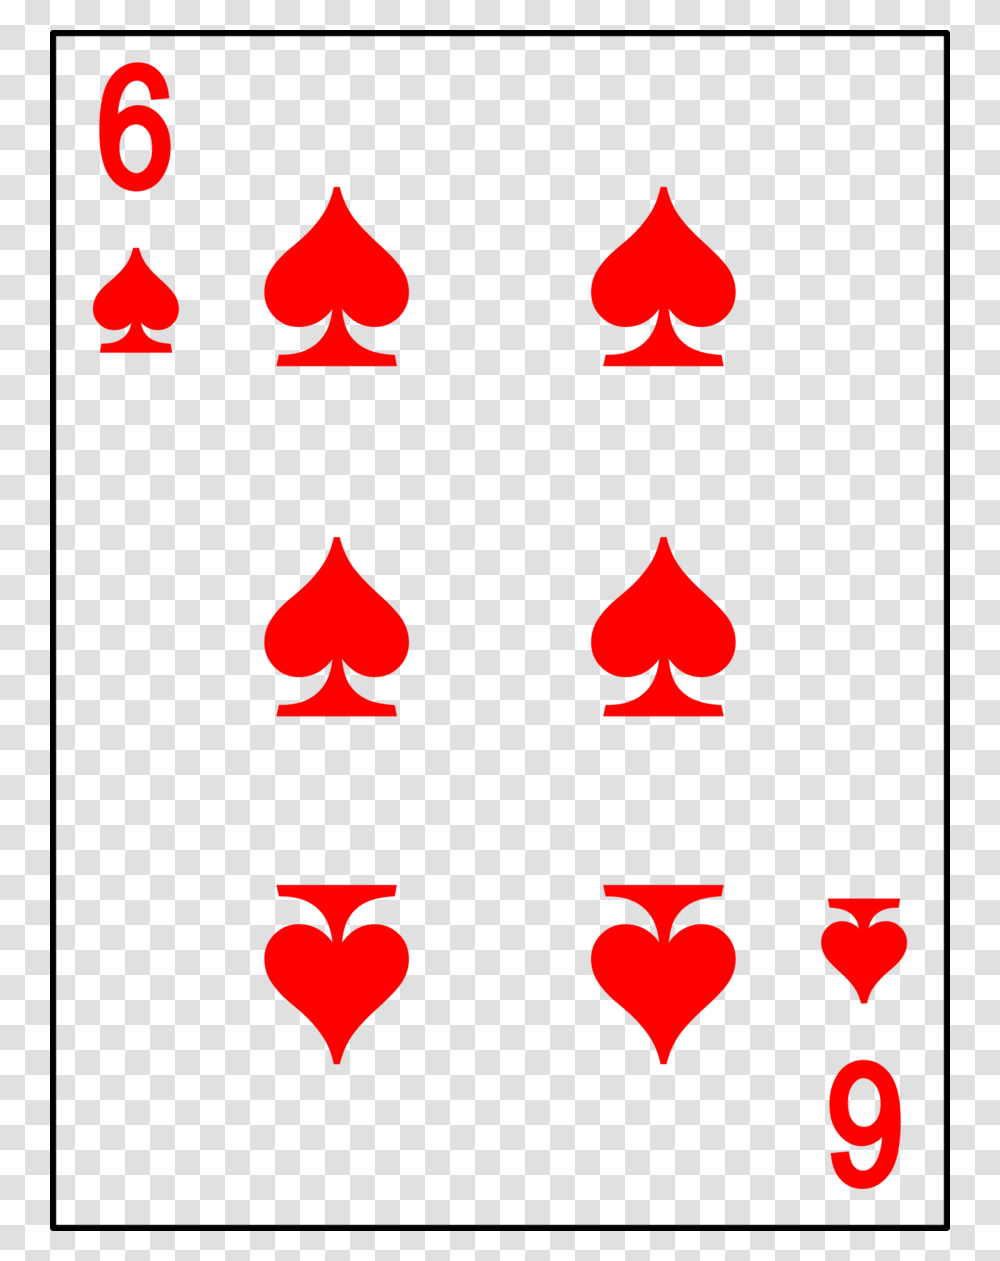 Download Spades Clipart Spades Playing Card Suit Suit Red Leaf, Poster, Advertisement, Star Symbol, Triangle Transparent Png